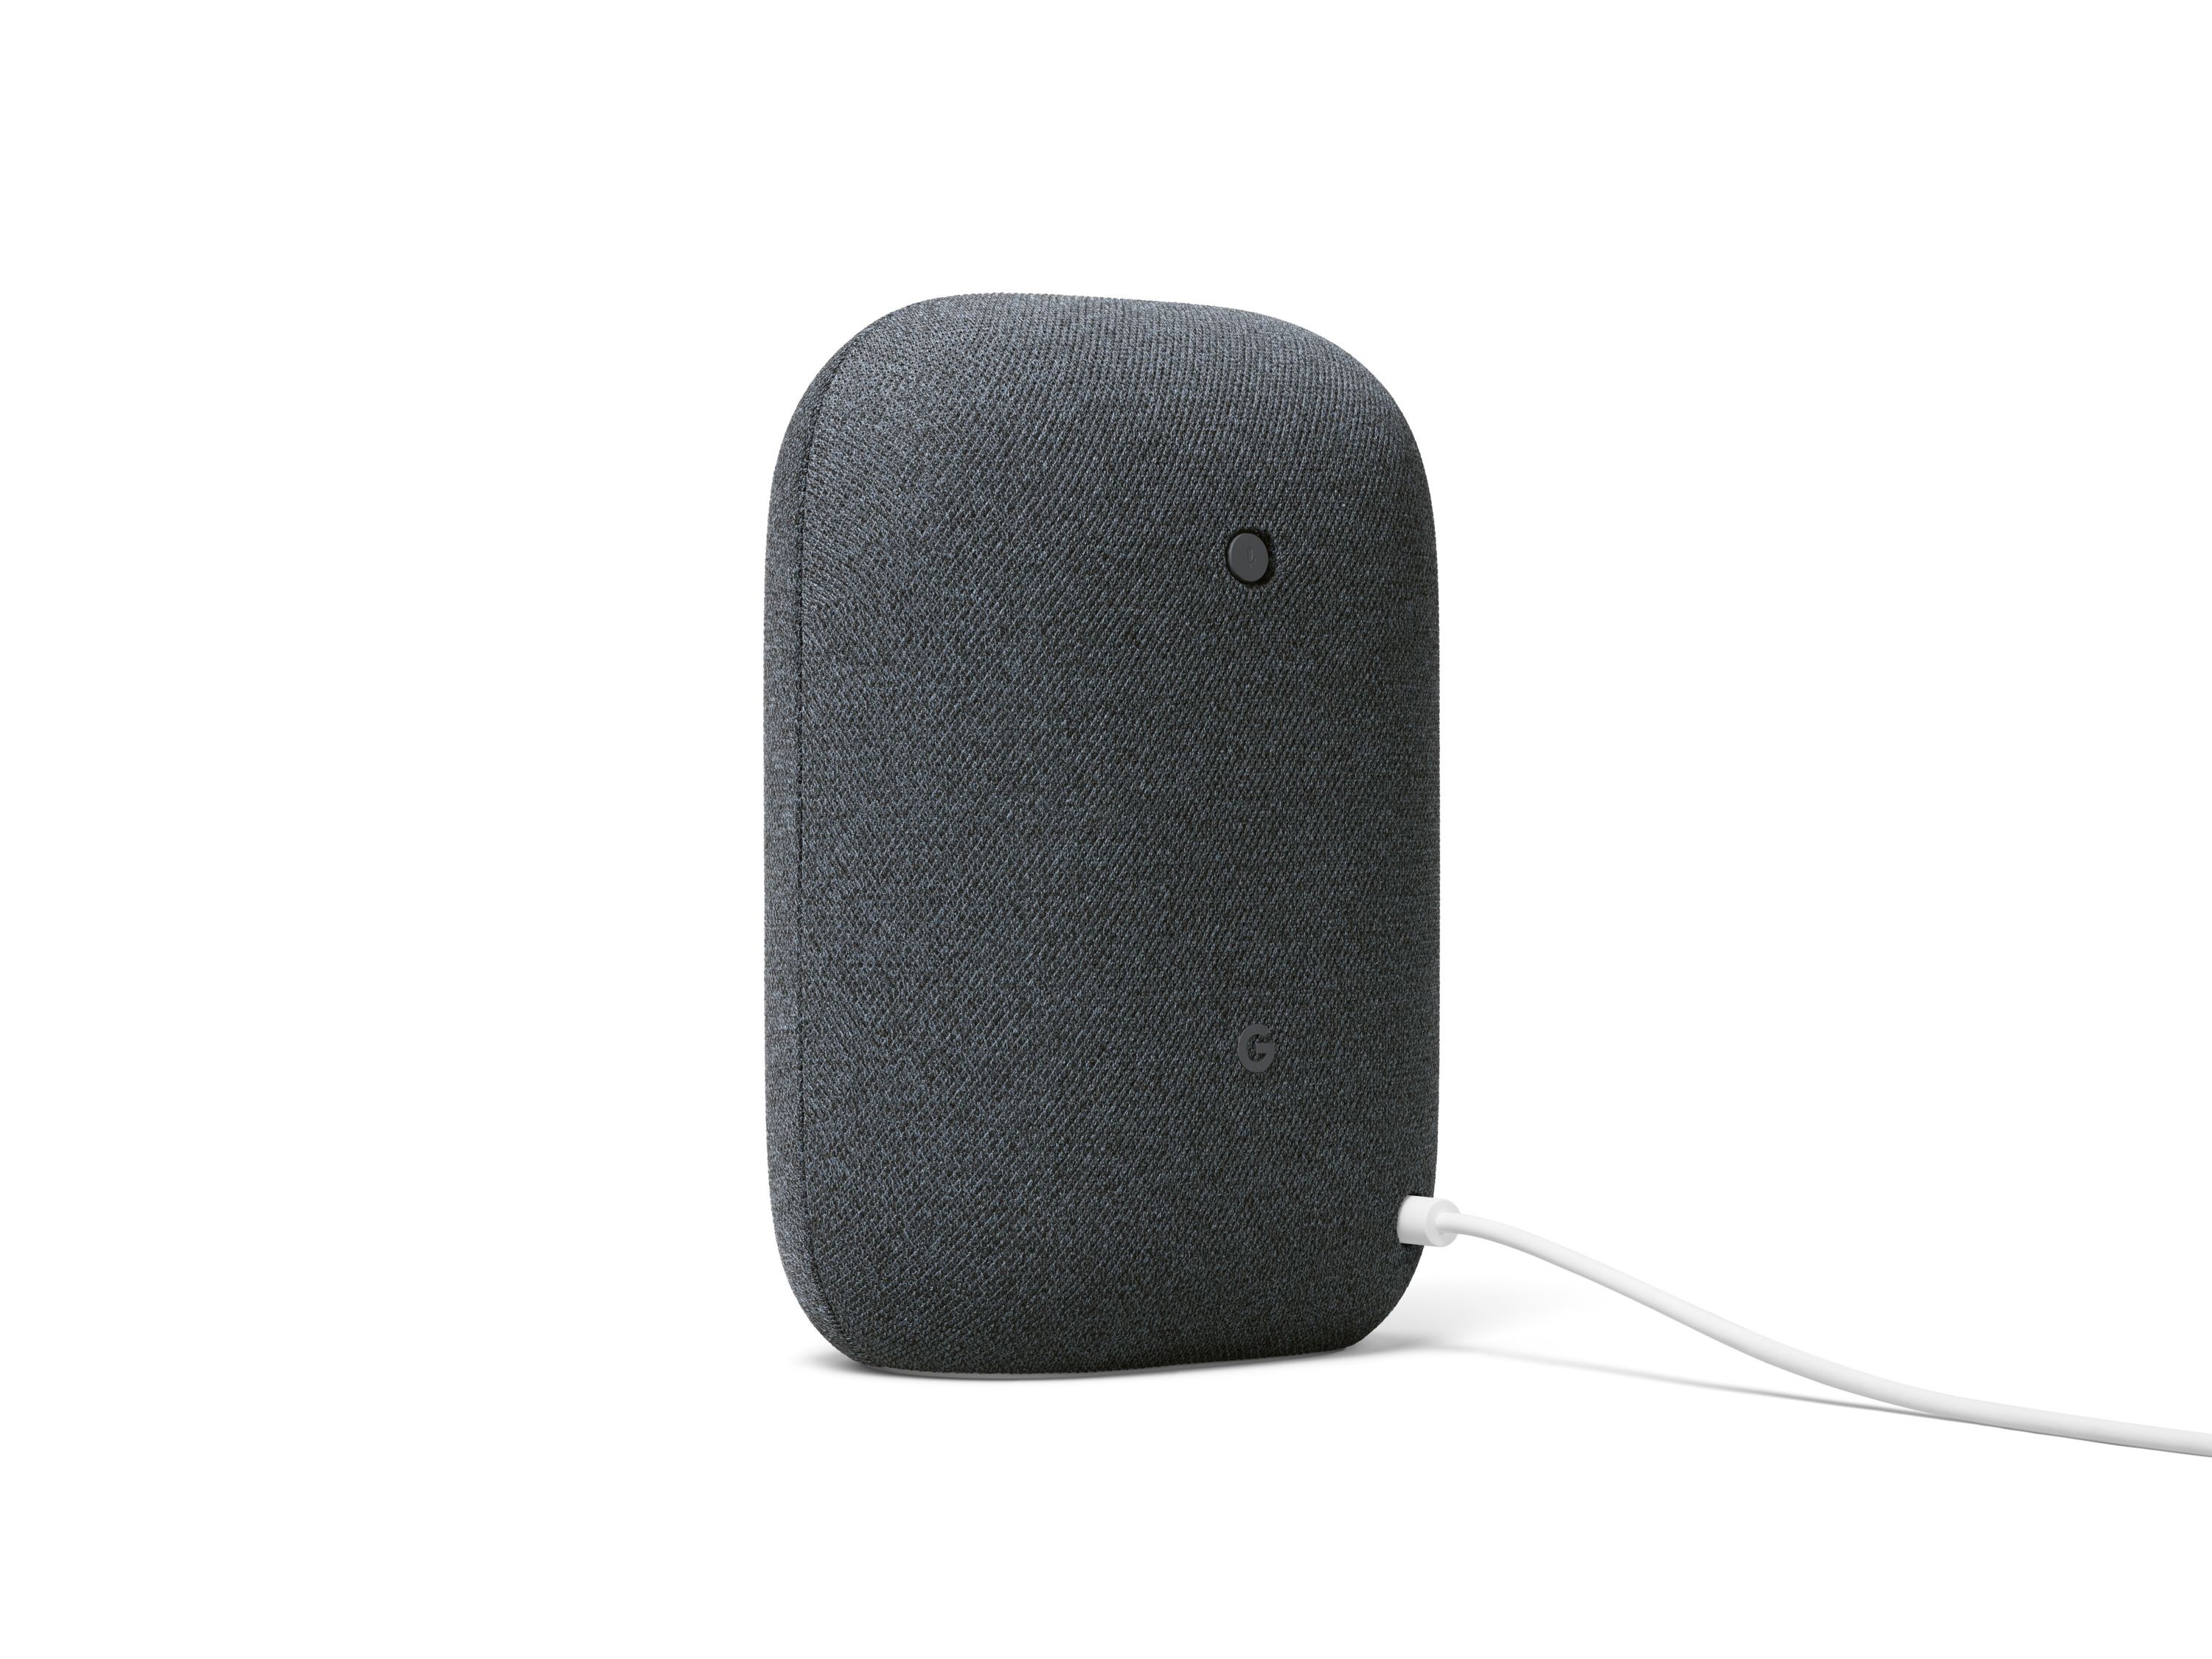 Google Nest Audio - Smart Speaker with Google Assistant - Charcoal - image 3 of 15